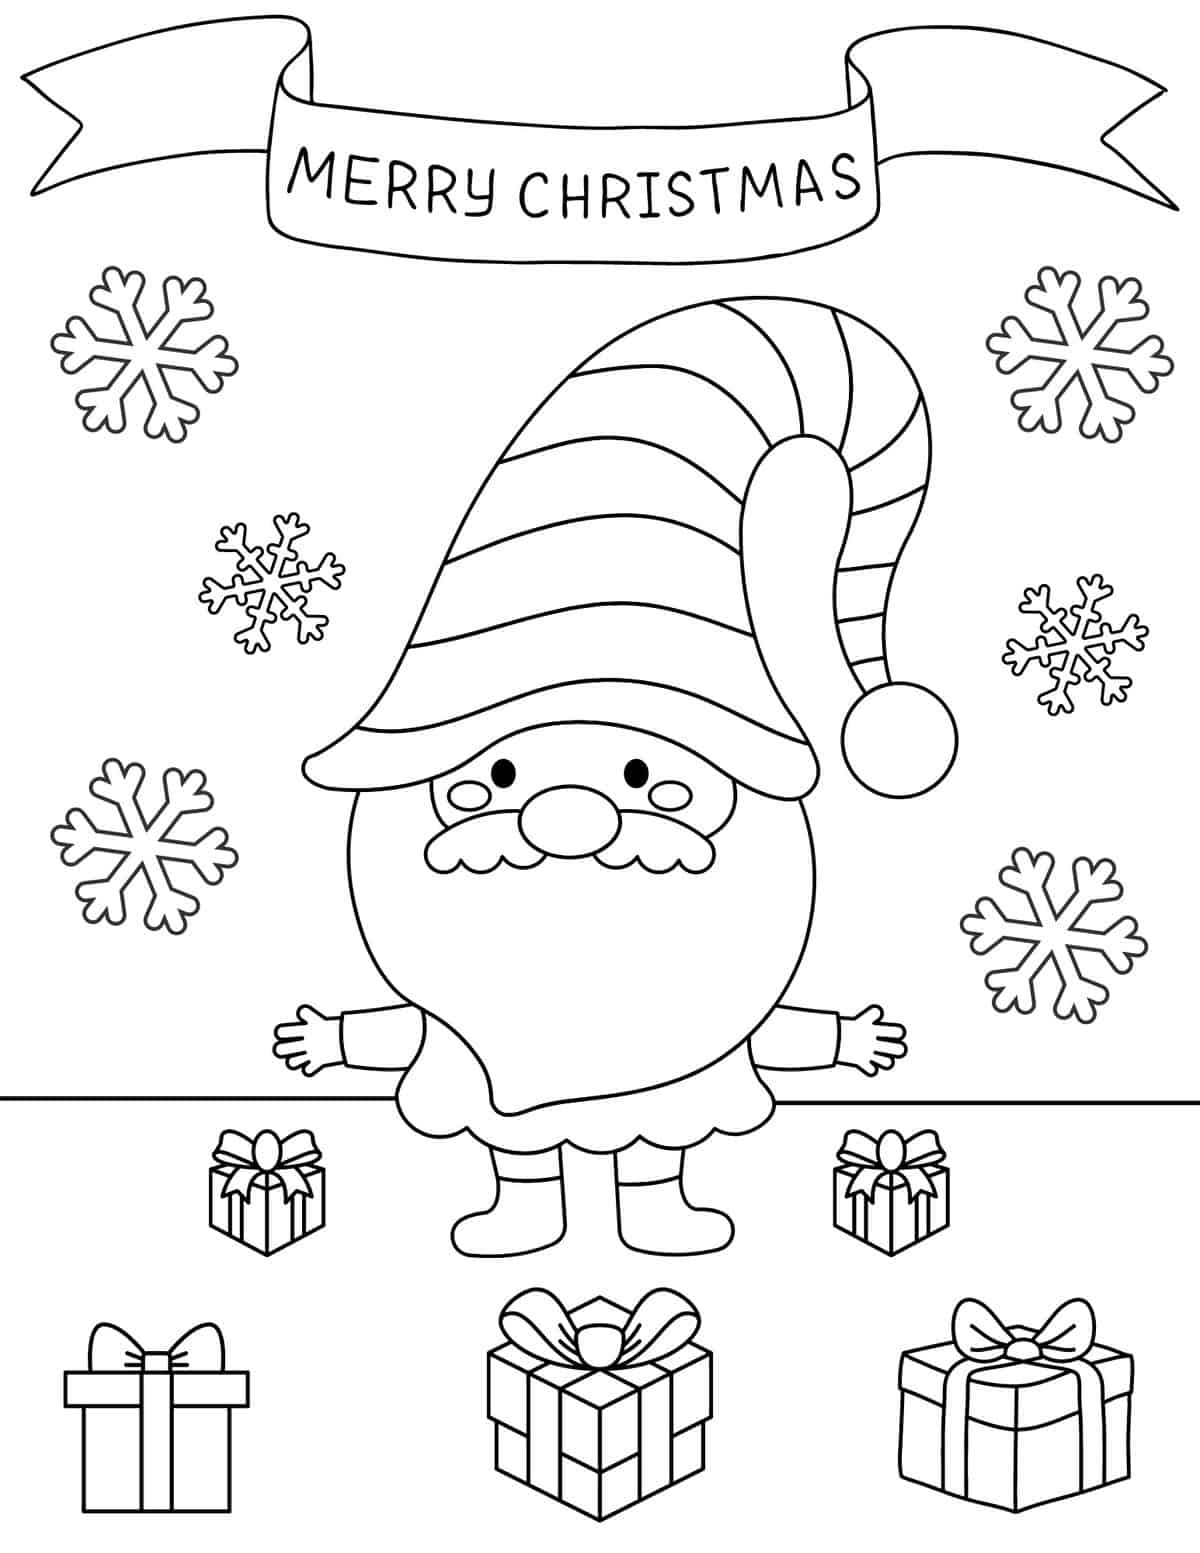 santa with christmas presents scattered on the floor coloring sheet 